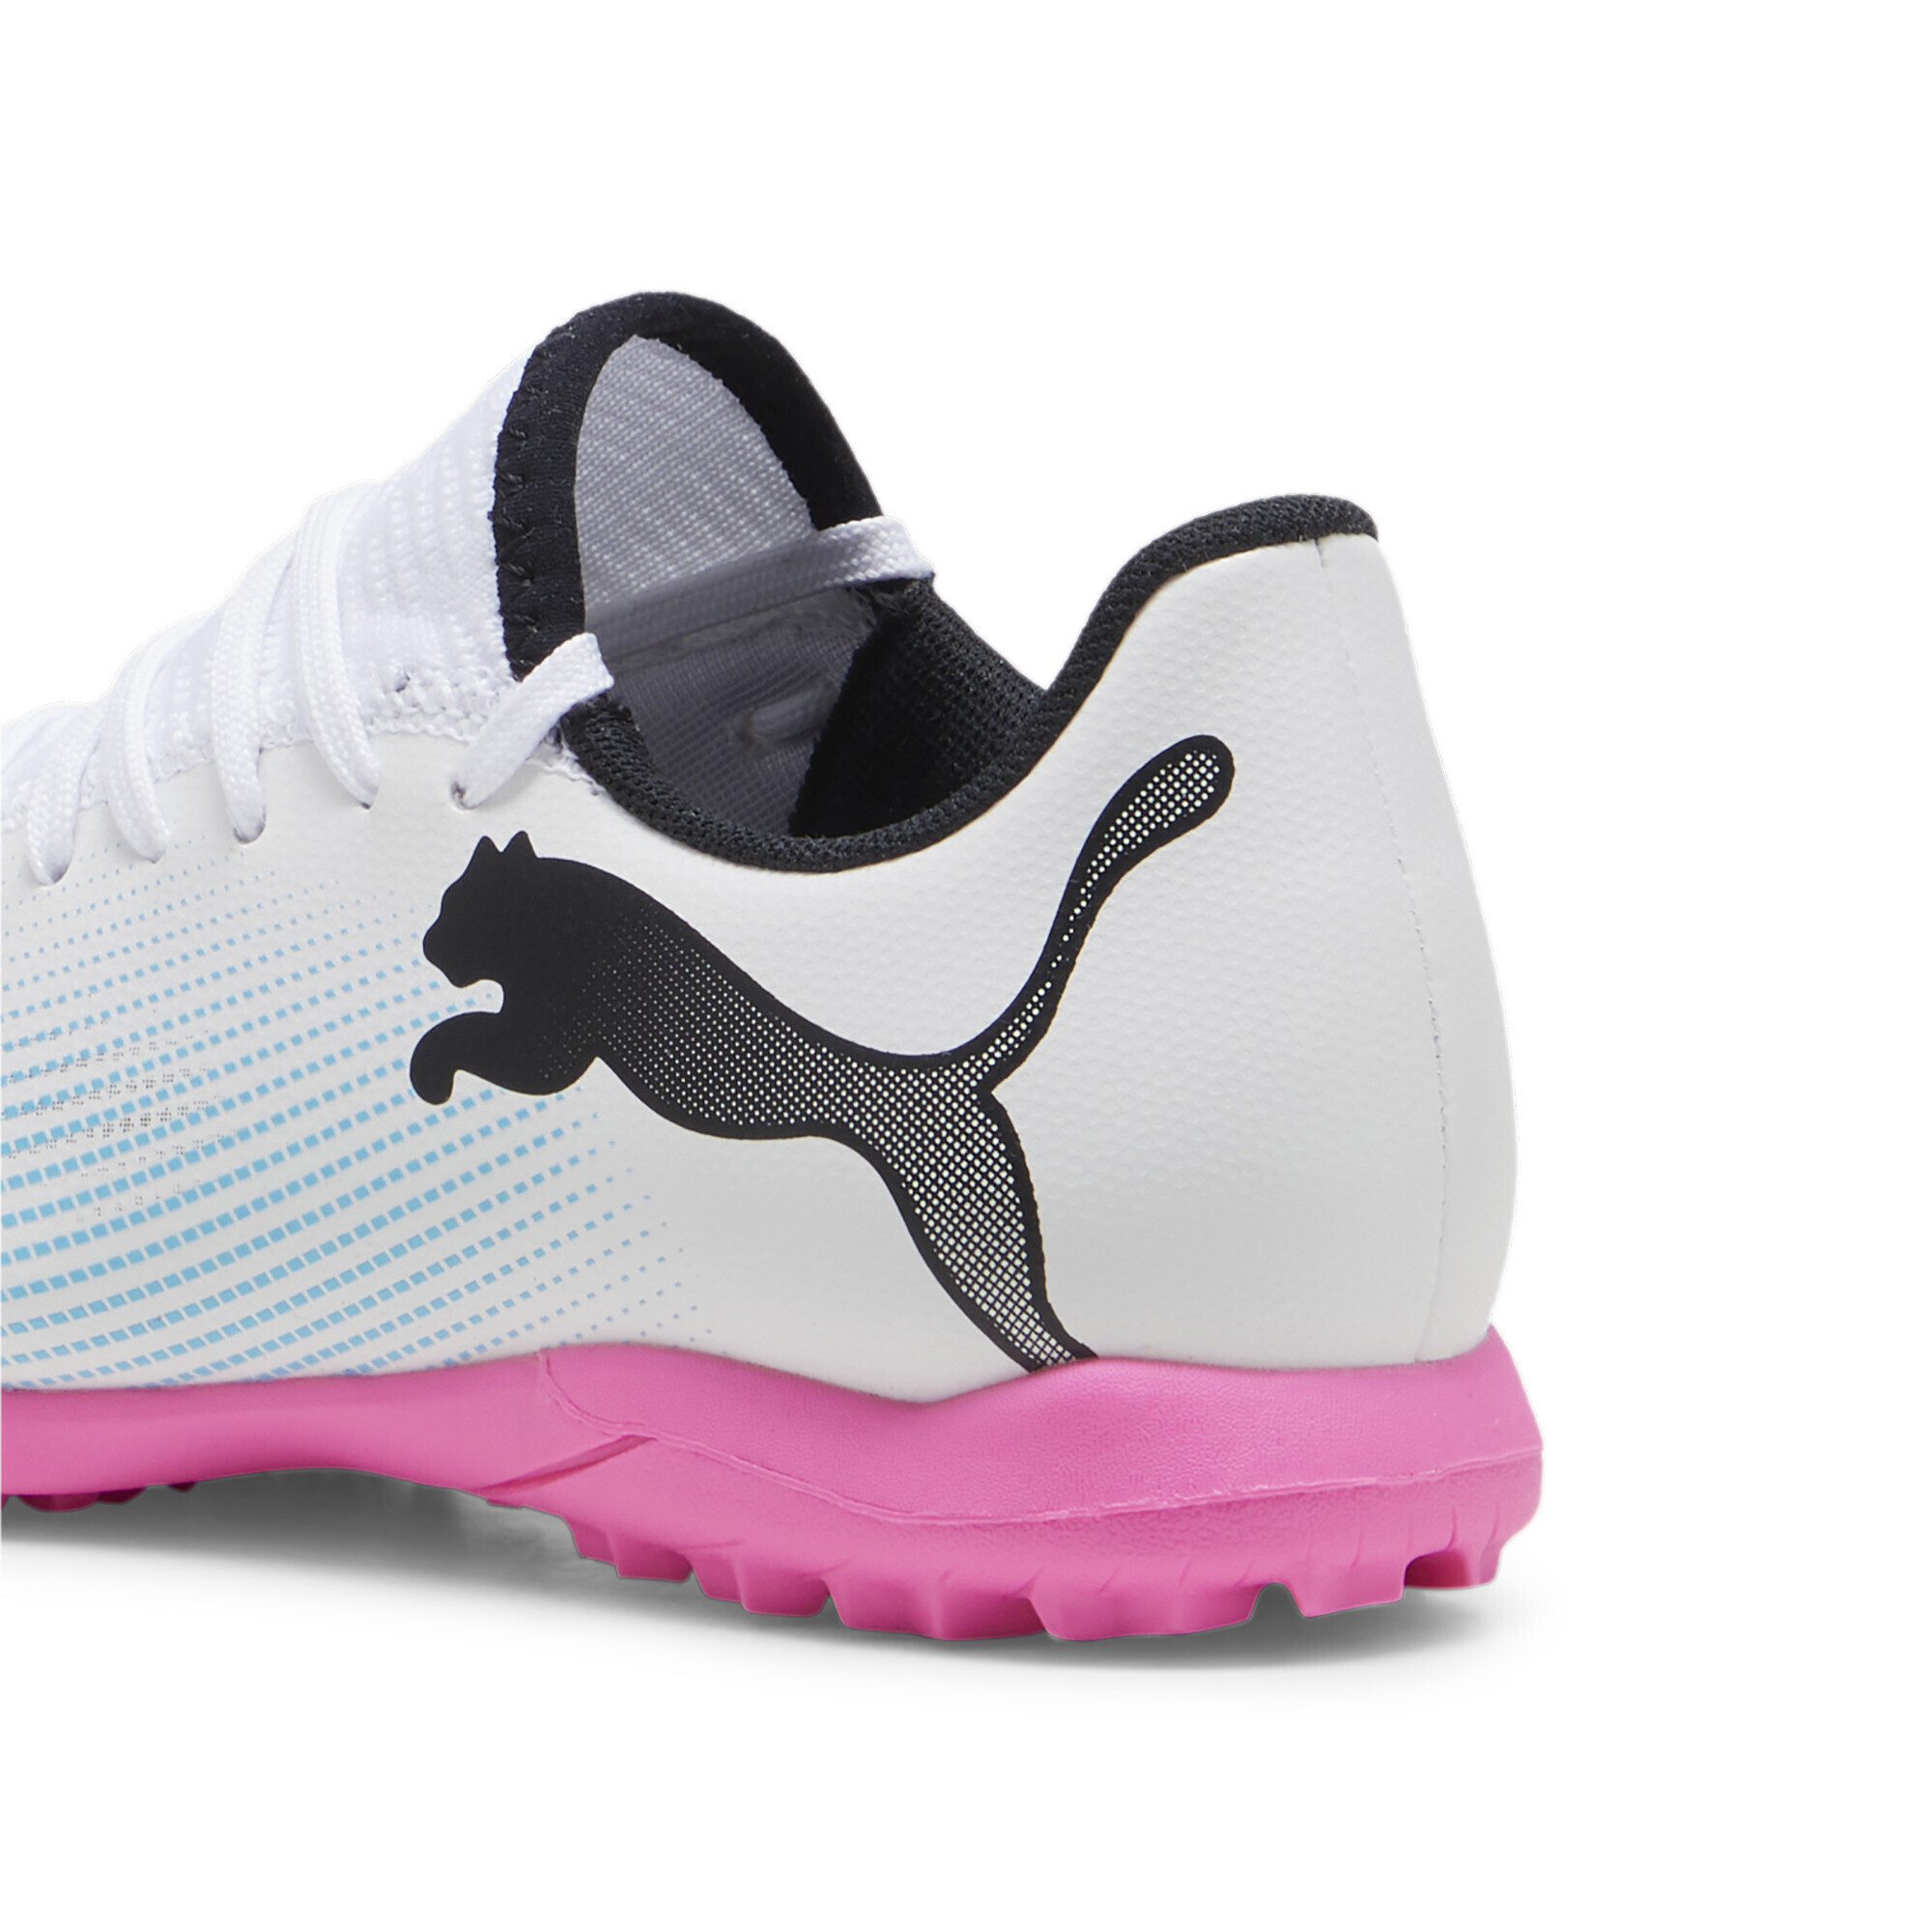 PUMA FUTURE 7 PLAY TT Youth Football Boots In White/Pink, Size EU 28